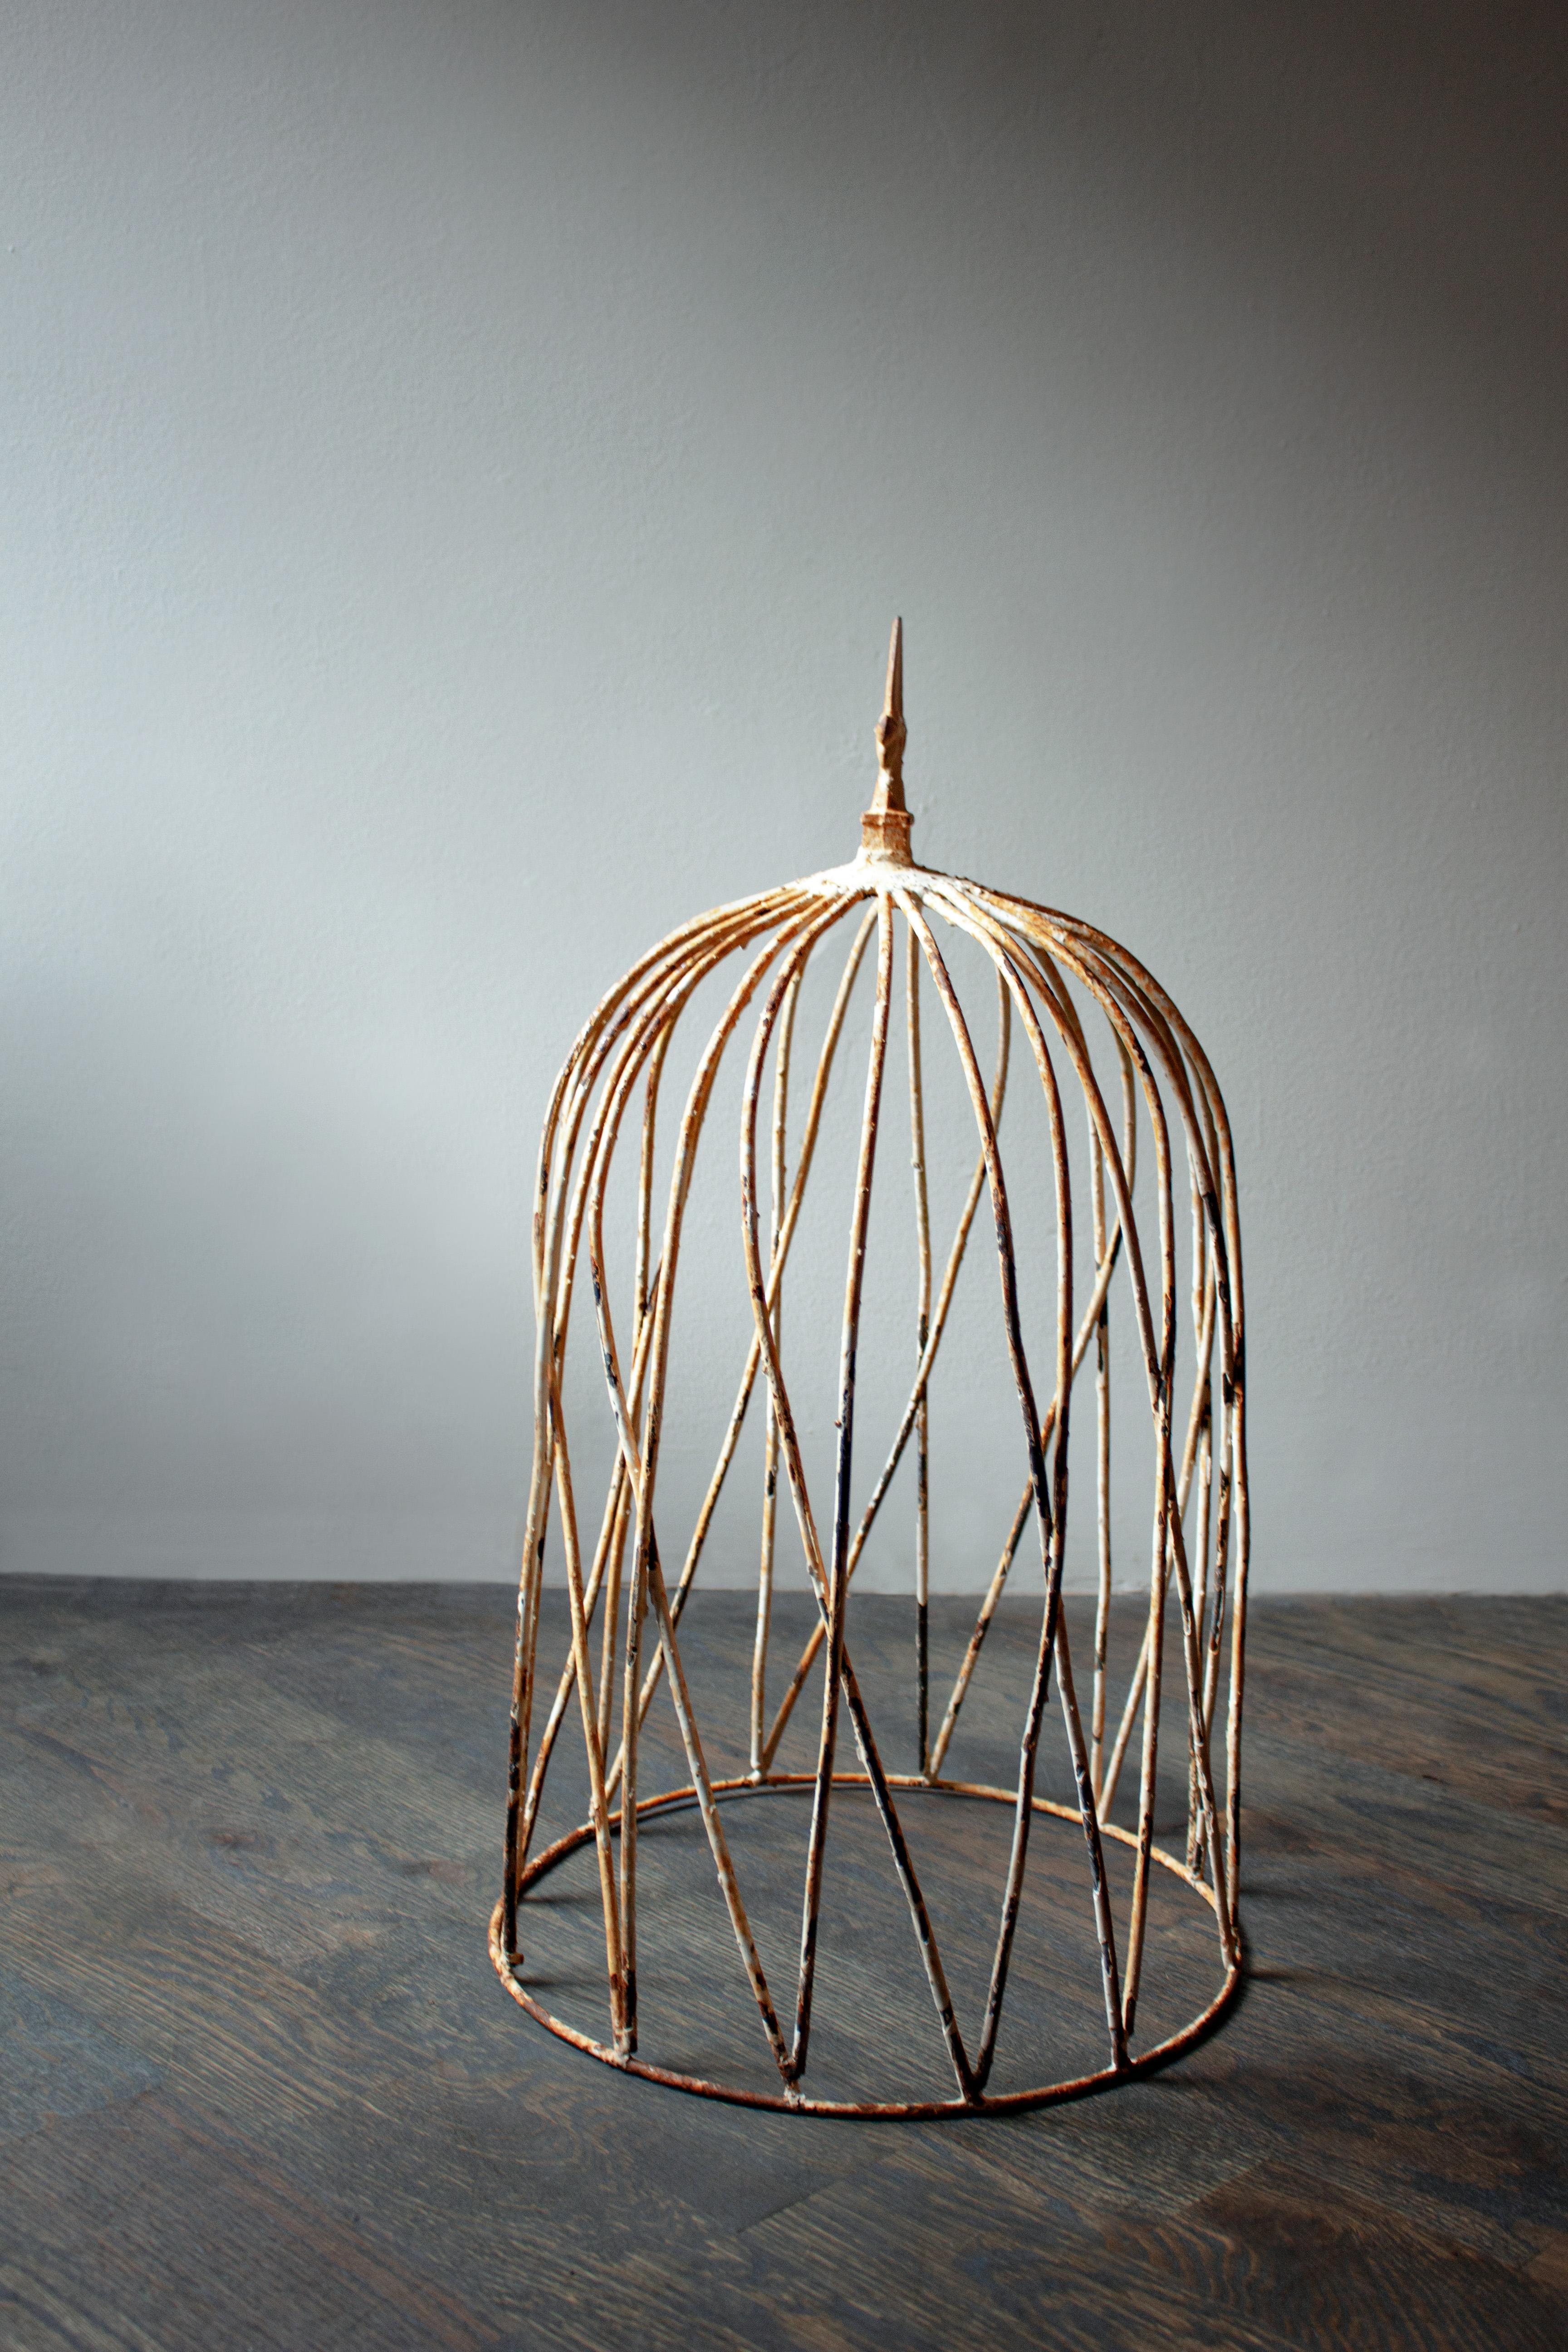 Authentically aged, this tall vintage cage is made of metal and originally finished with white paint. The antiqued paint gives character and history to the object. With fleur-de-lis emblem.